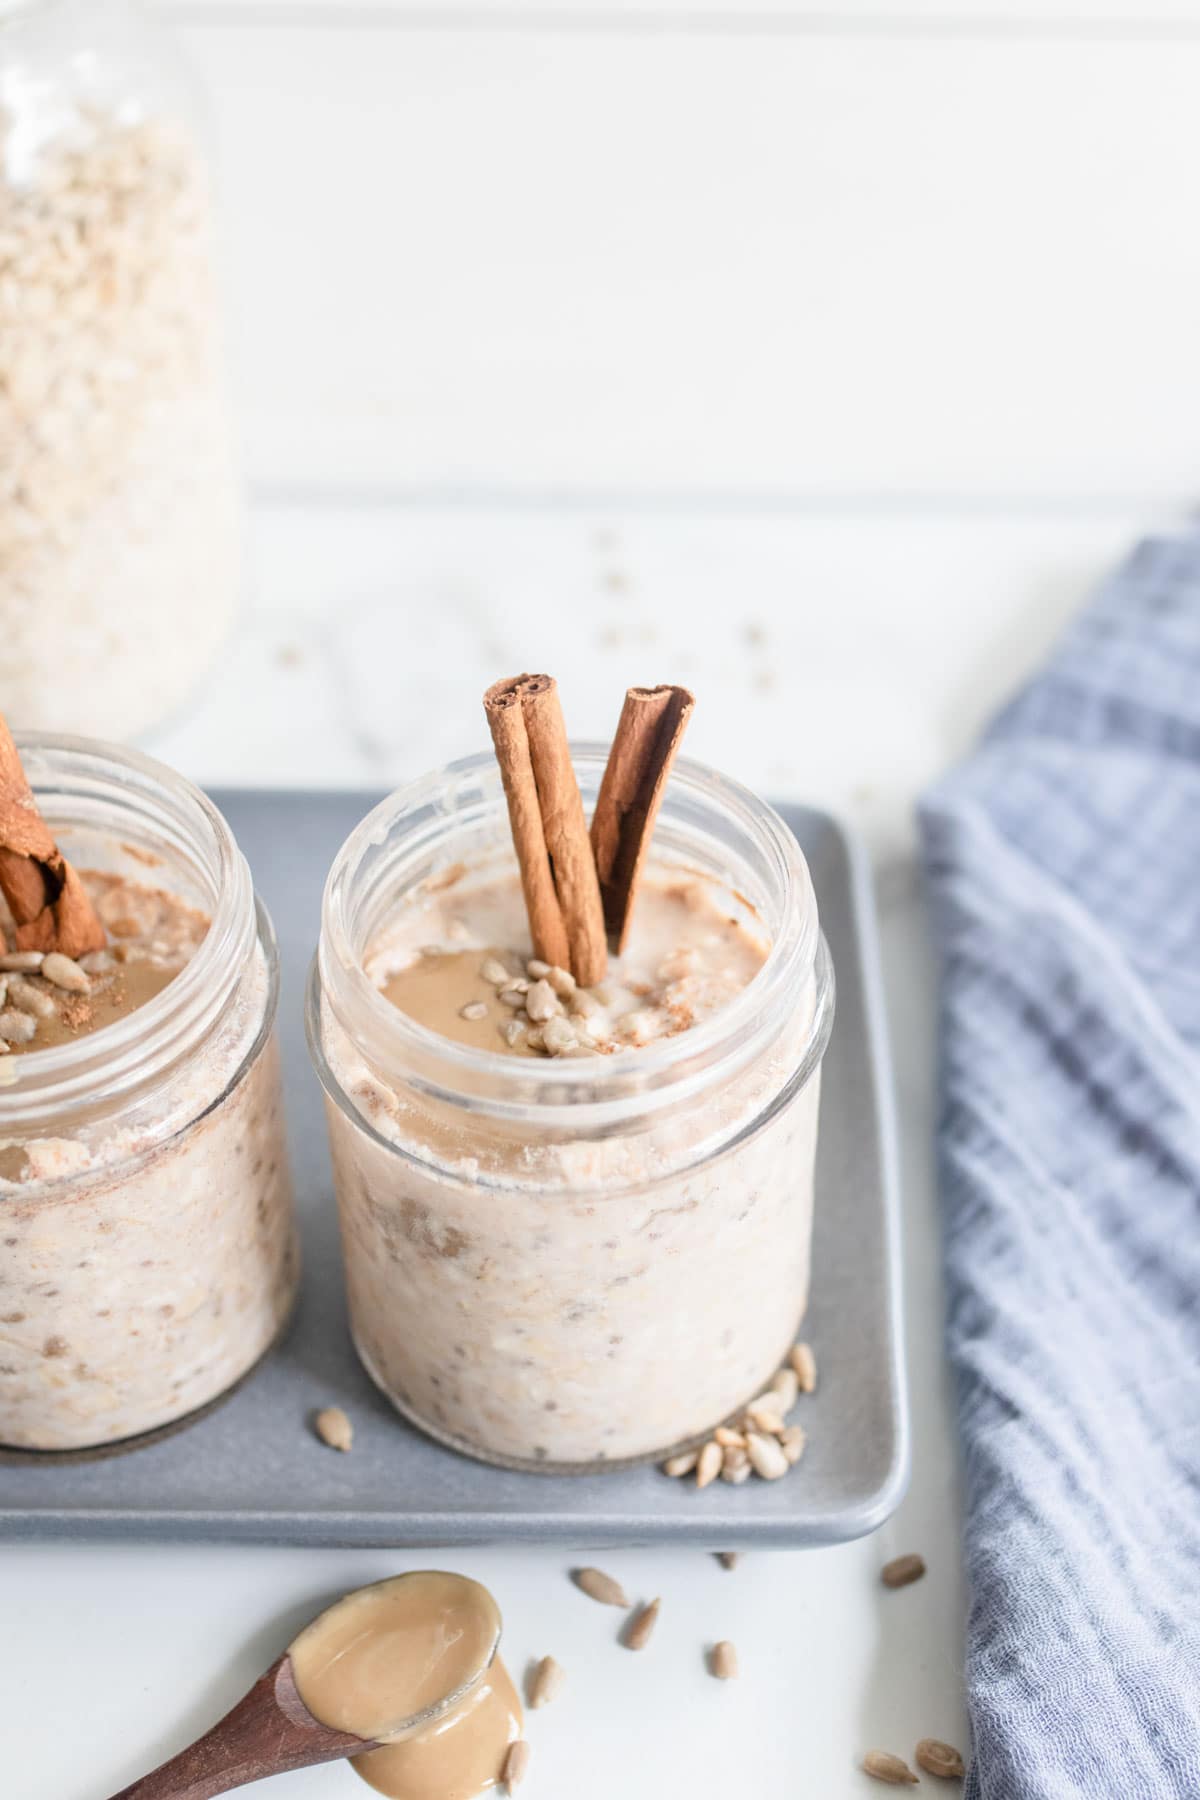 A jar of overnight oats on a baking sheet with a blue towel.